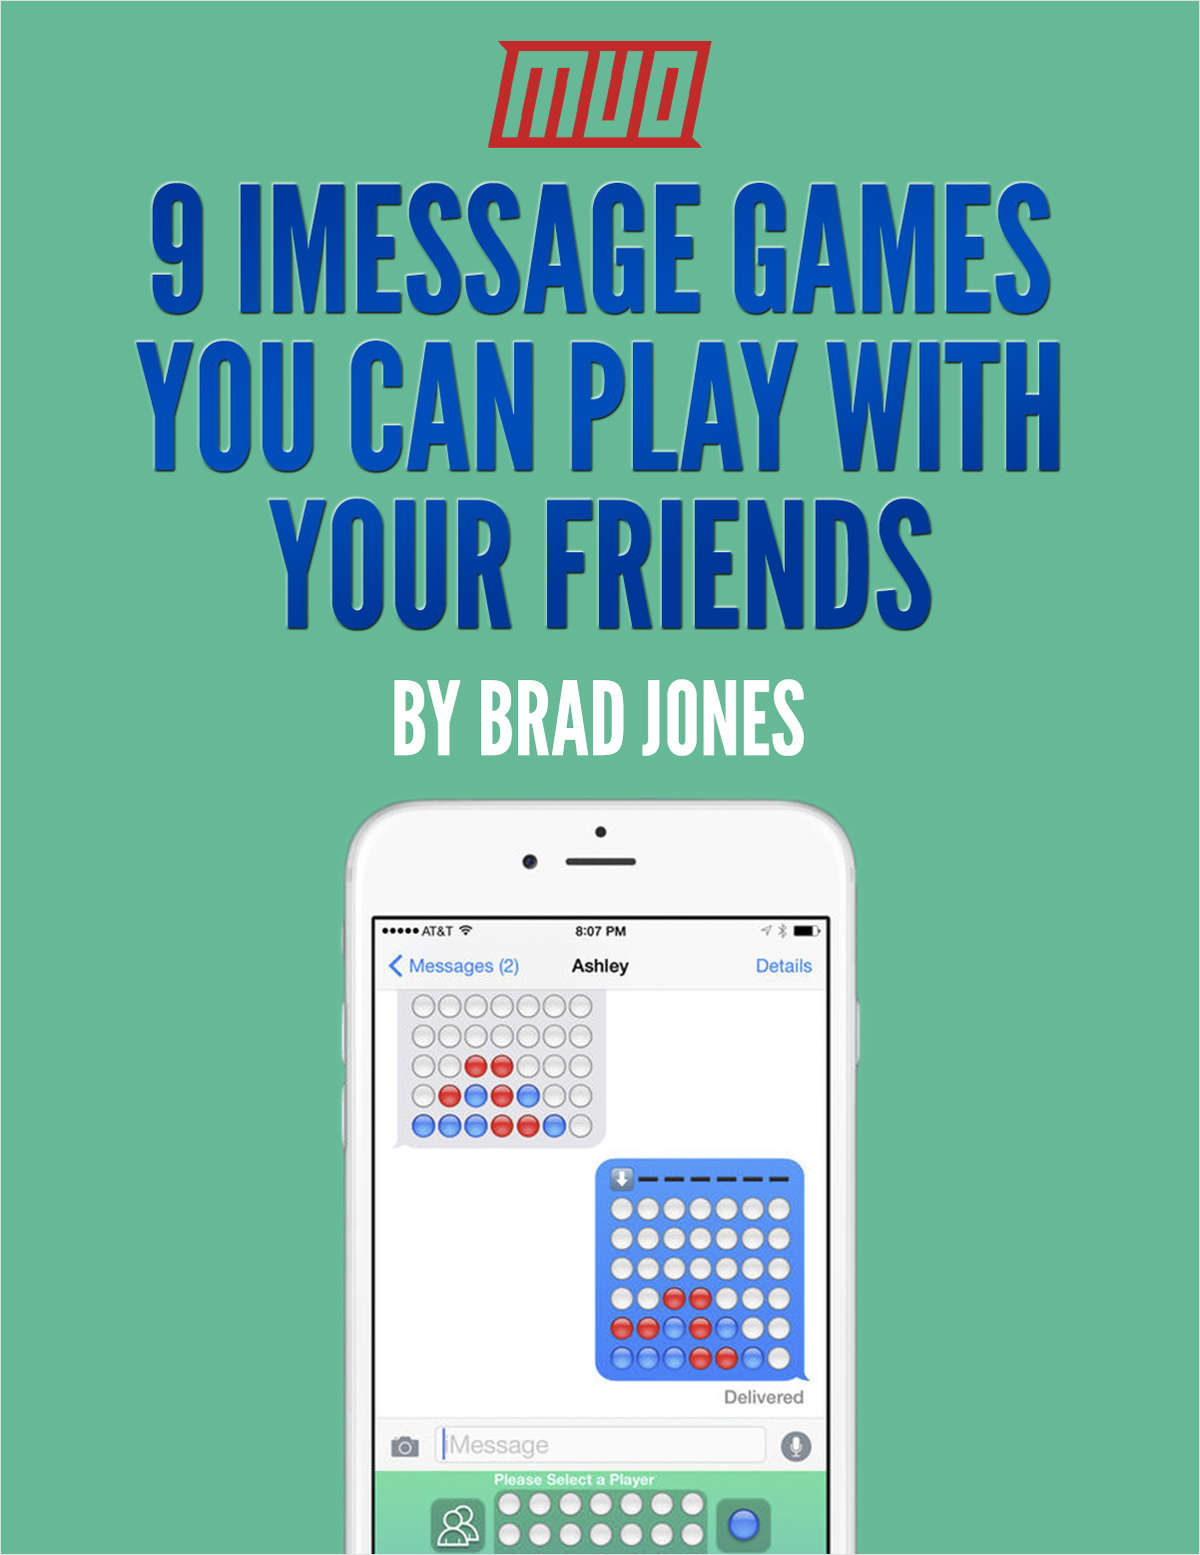 9 iMessage Games You Can Play with Your Friends